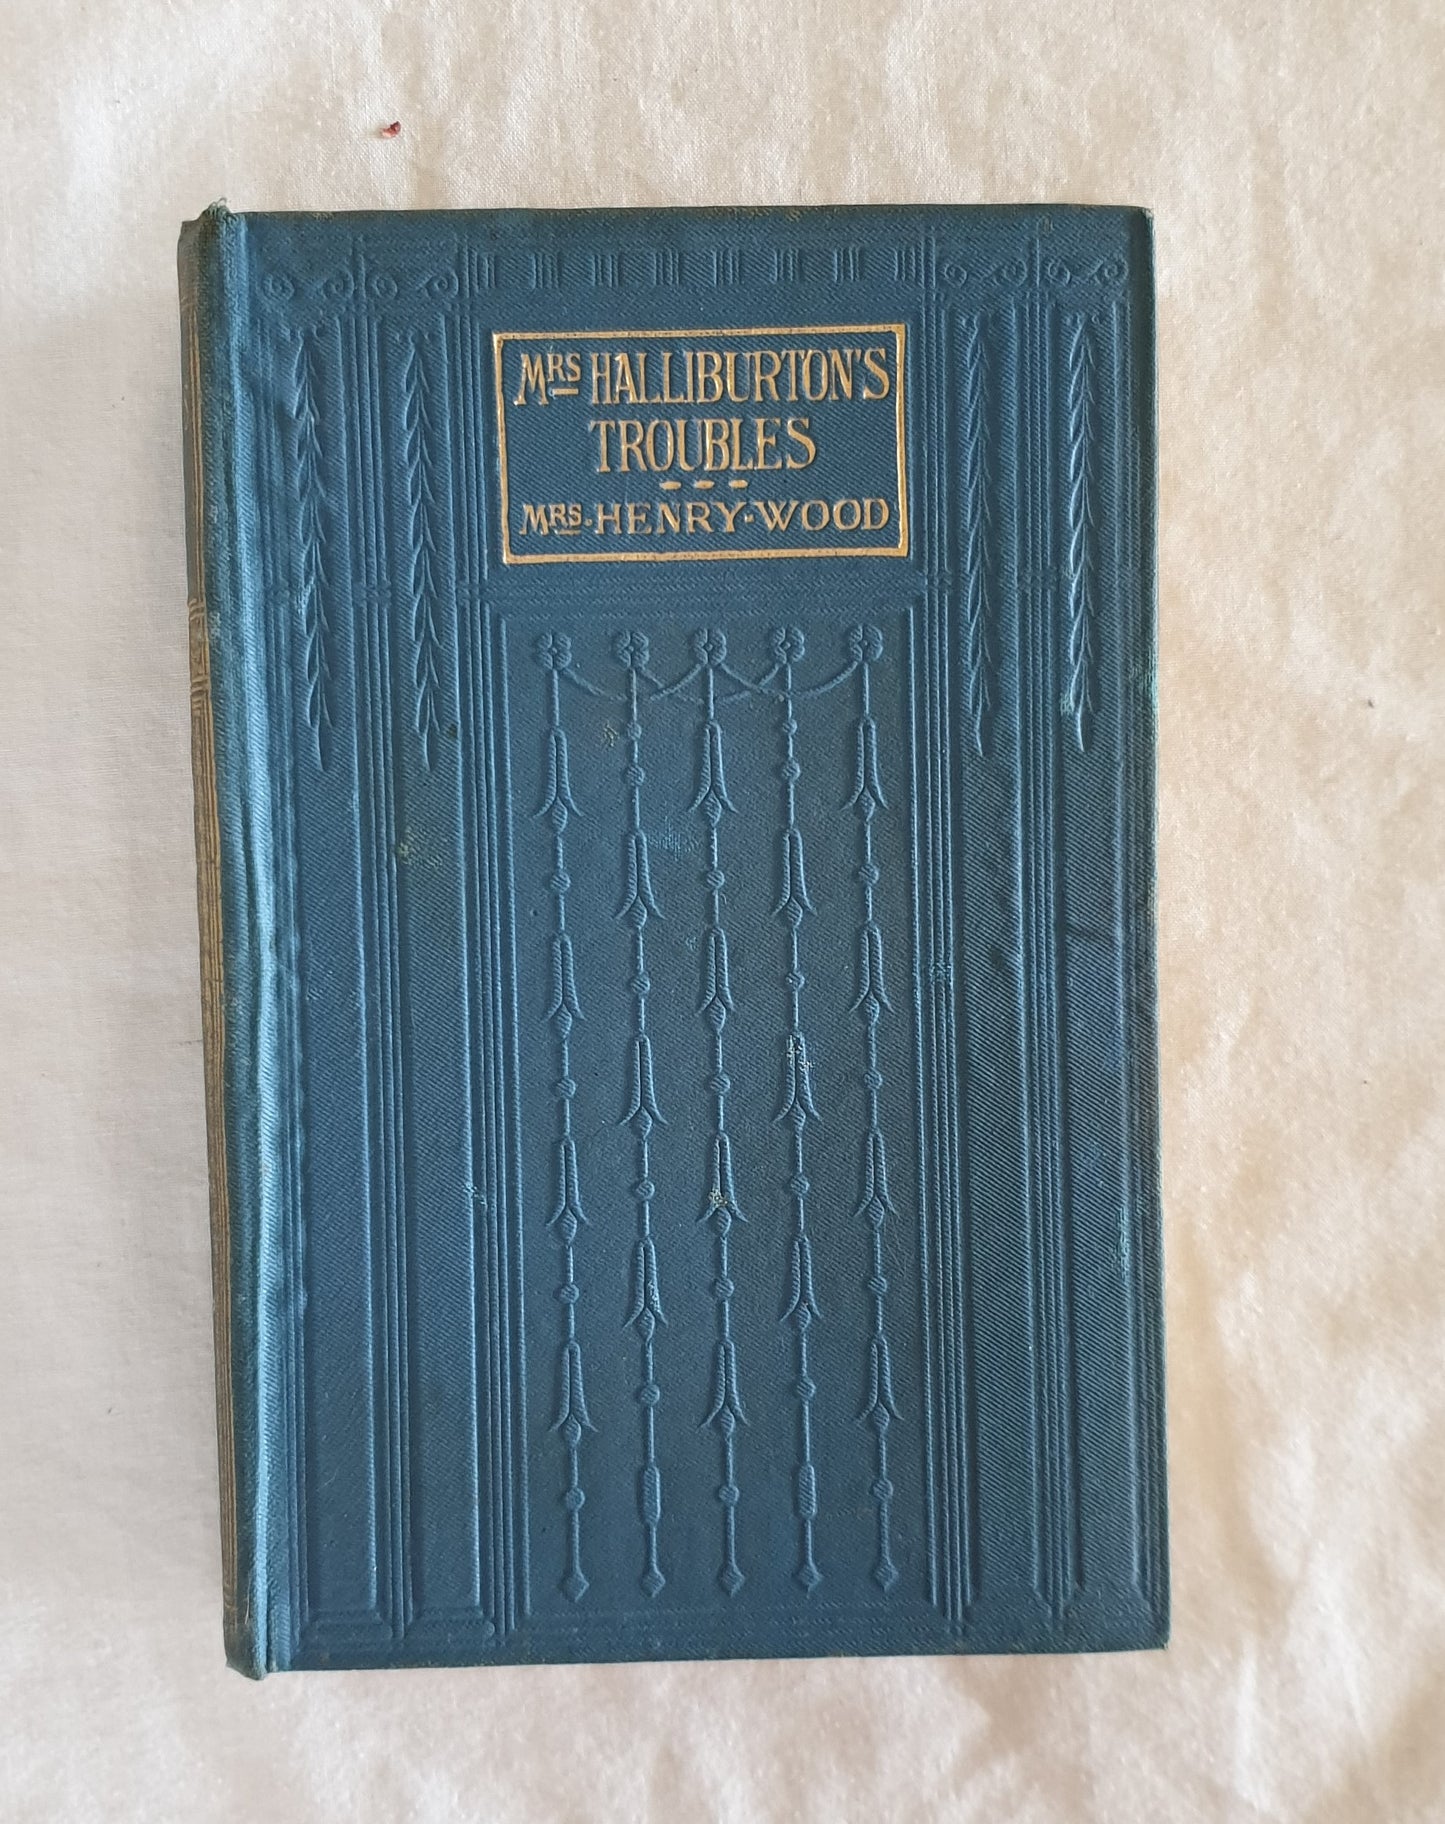 Mrs. Halliburton's Troubles by Mrs. Henry Wood